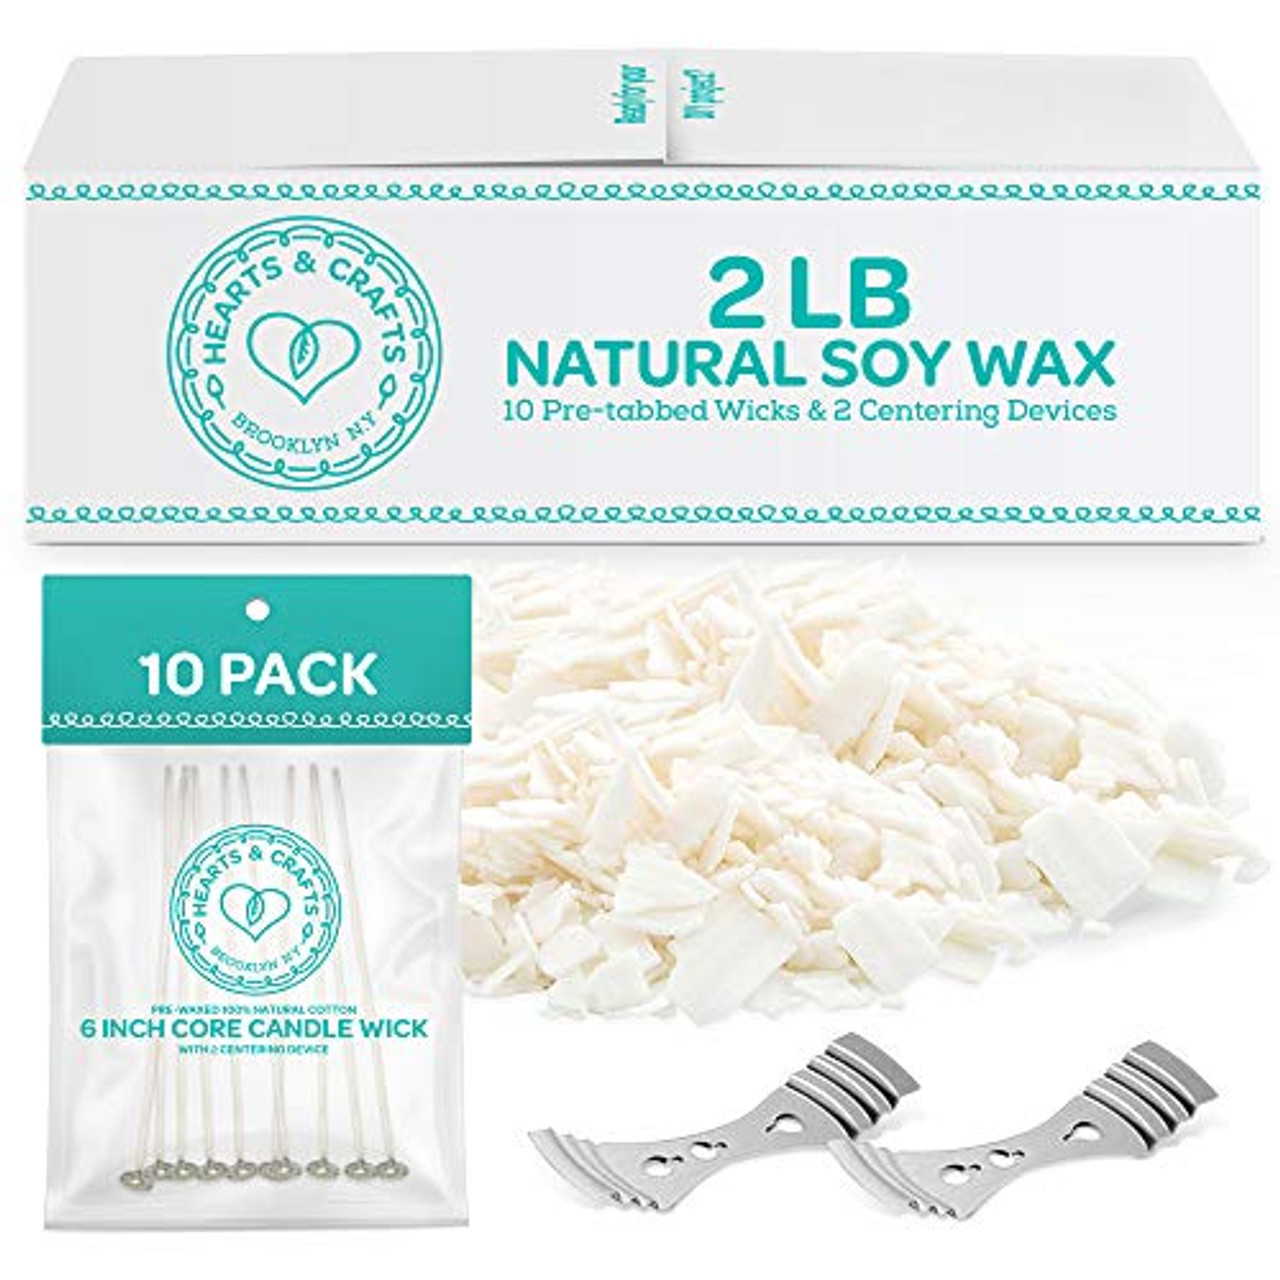 Soy Wax 10lb and DIY Candle Making Supplies with 200 6-Inch Pre-Waxed Wicks 200 Candle Wick Stickers and 2 Centering Devices 